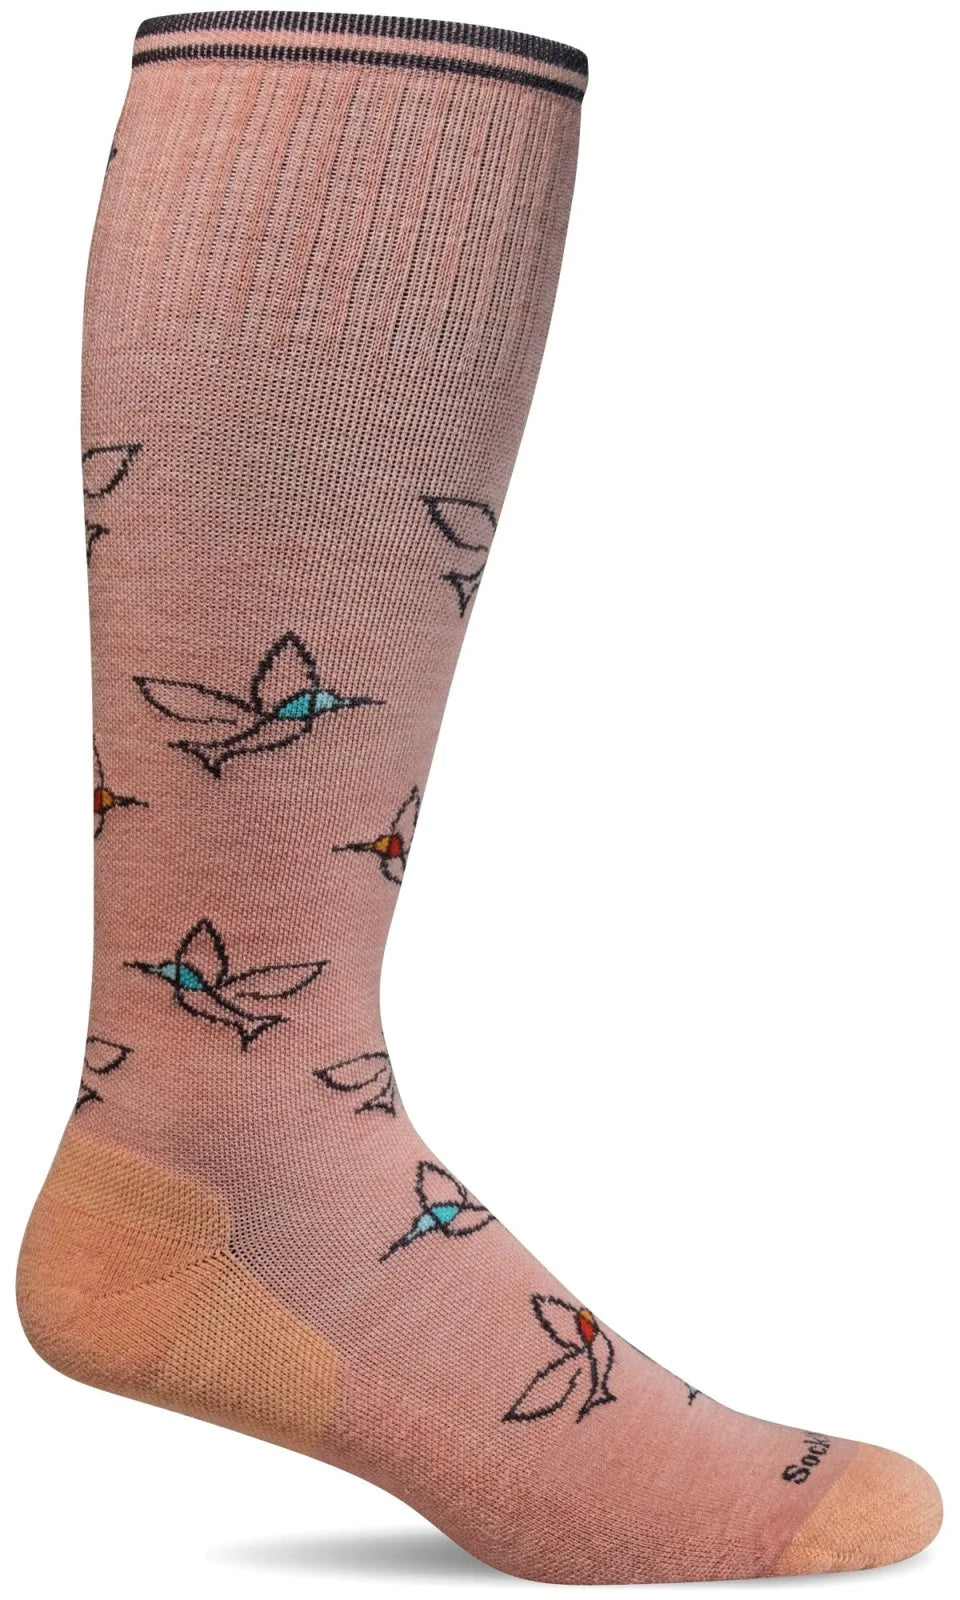 Free Fly | Women's Moderate Compression Knee-High